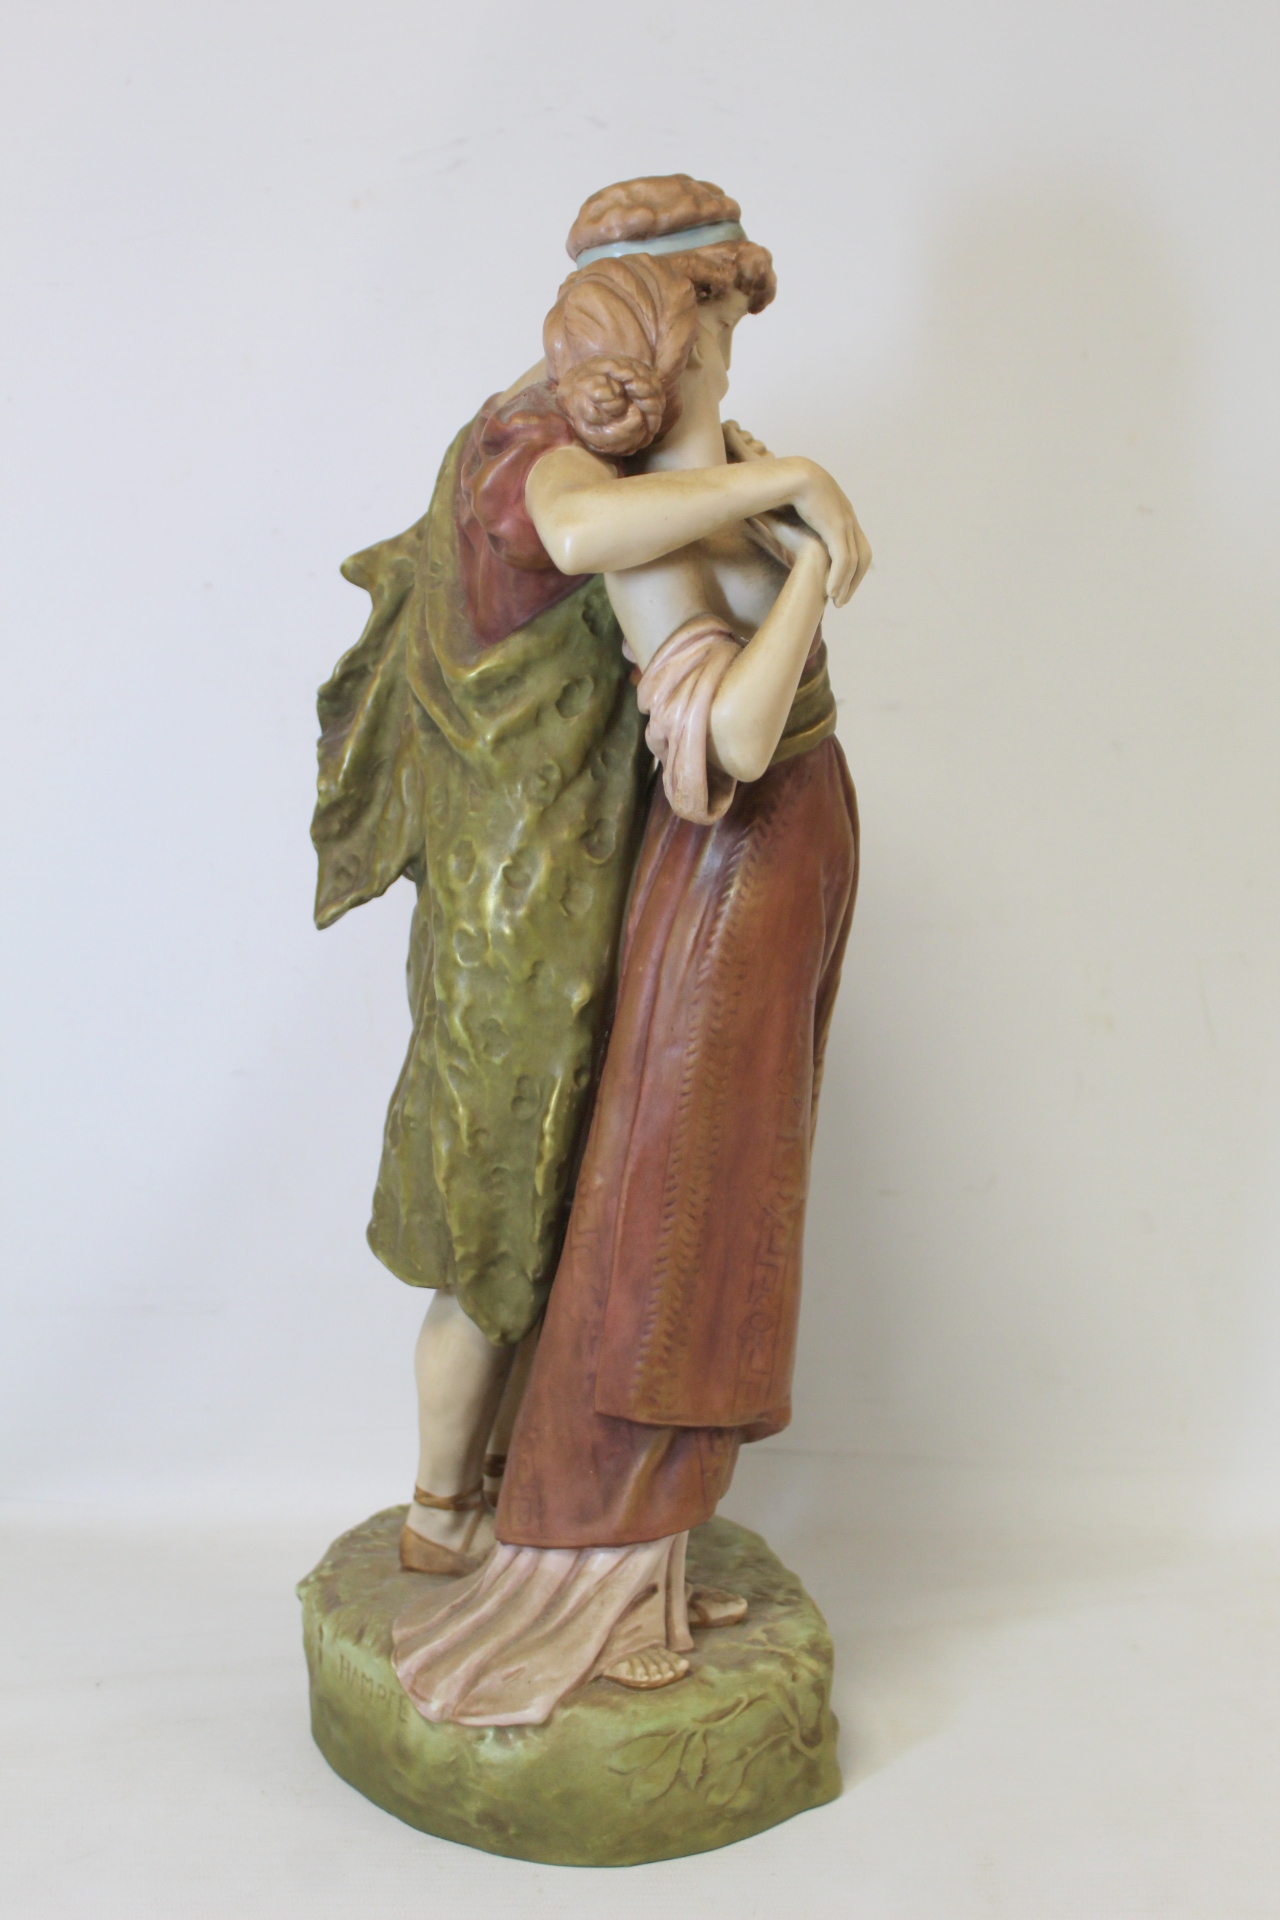 Royal Dux porcelain figure group of two lovers, both in classical dress, by Alois Hampel, - Image 5 of 9